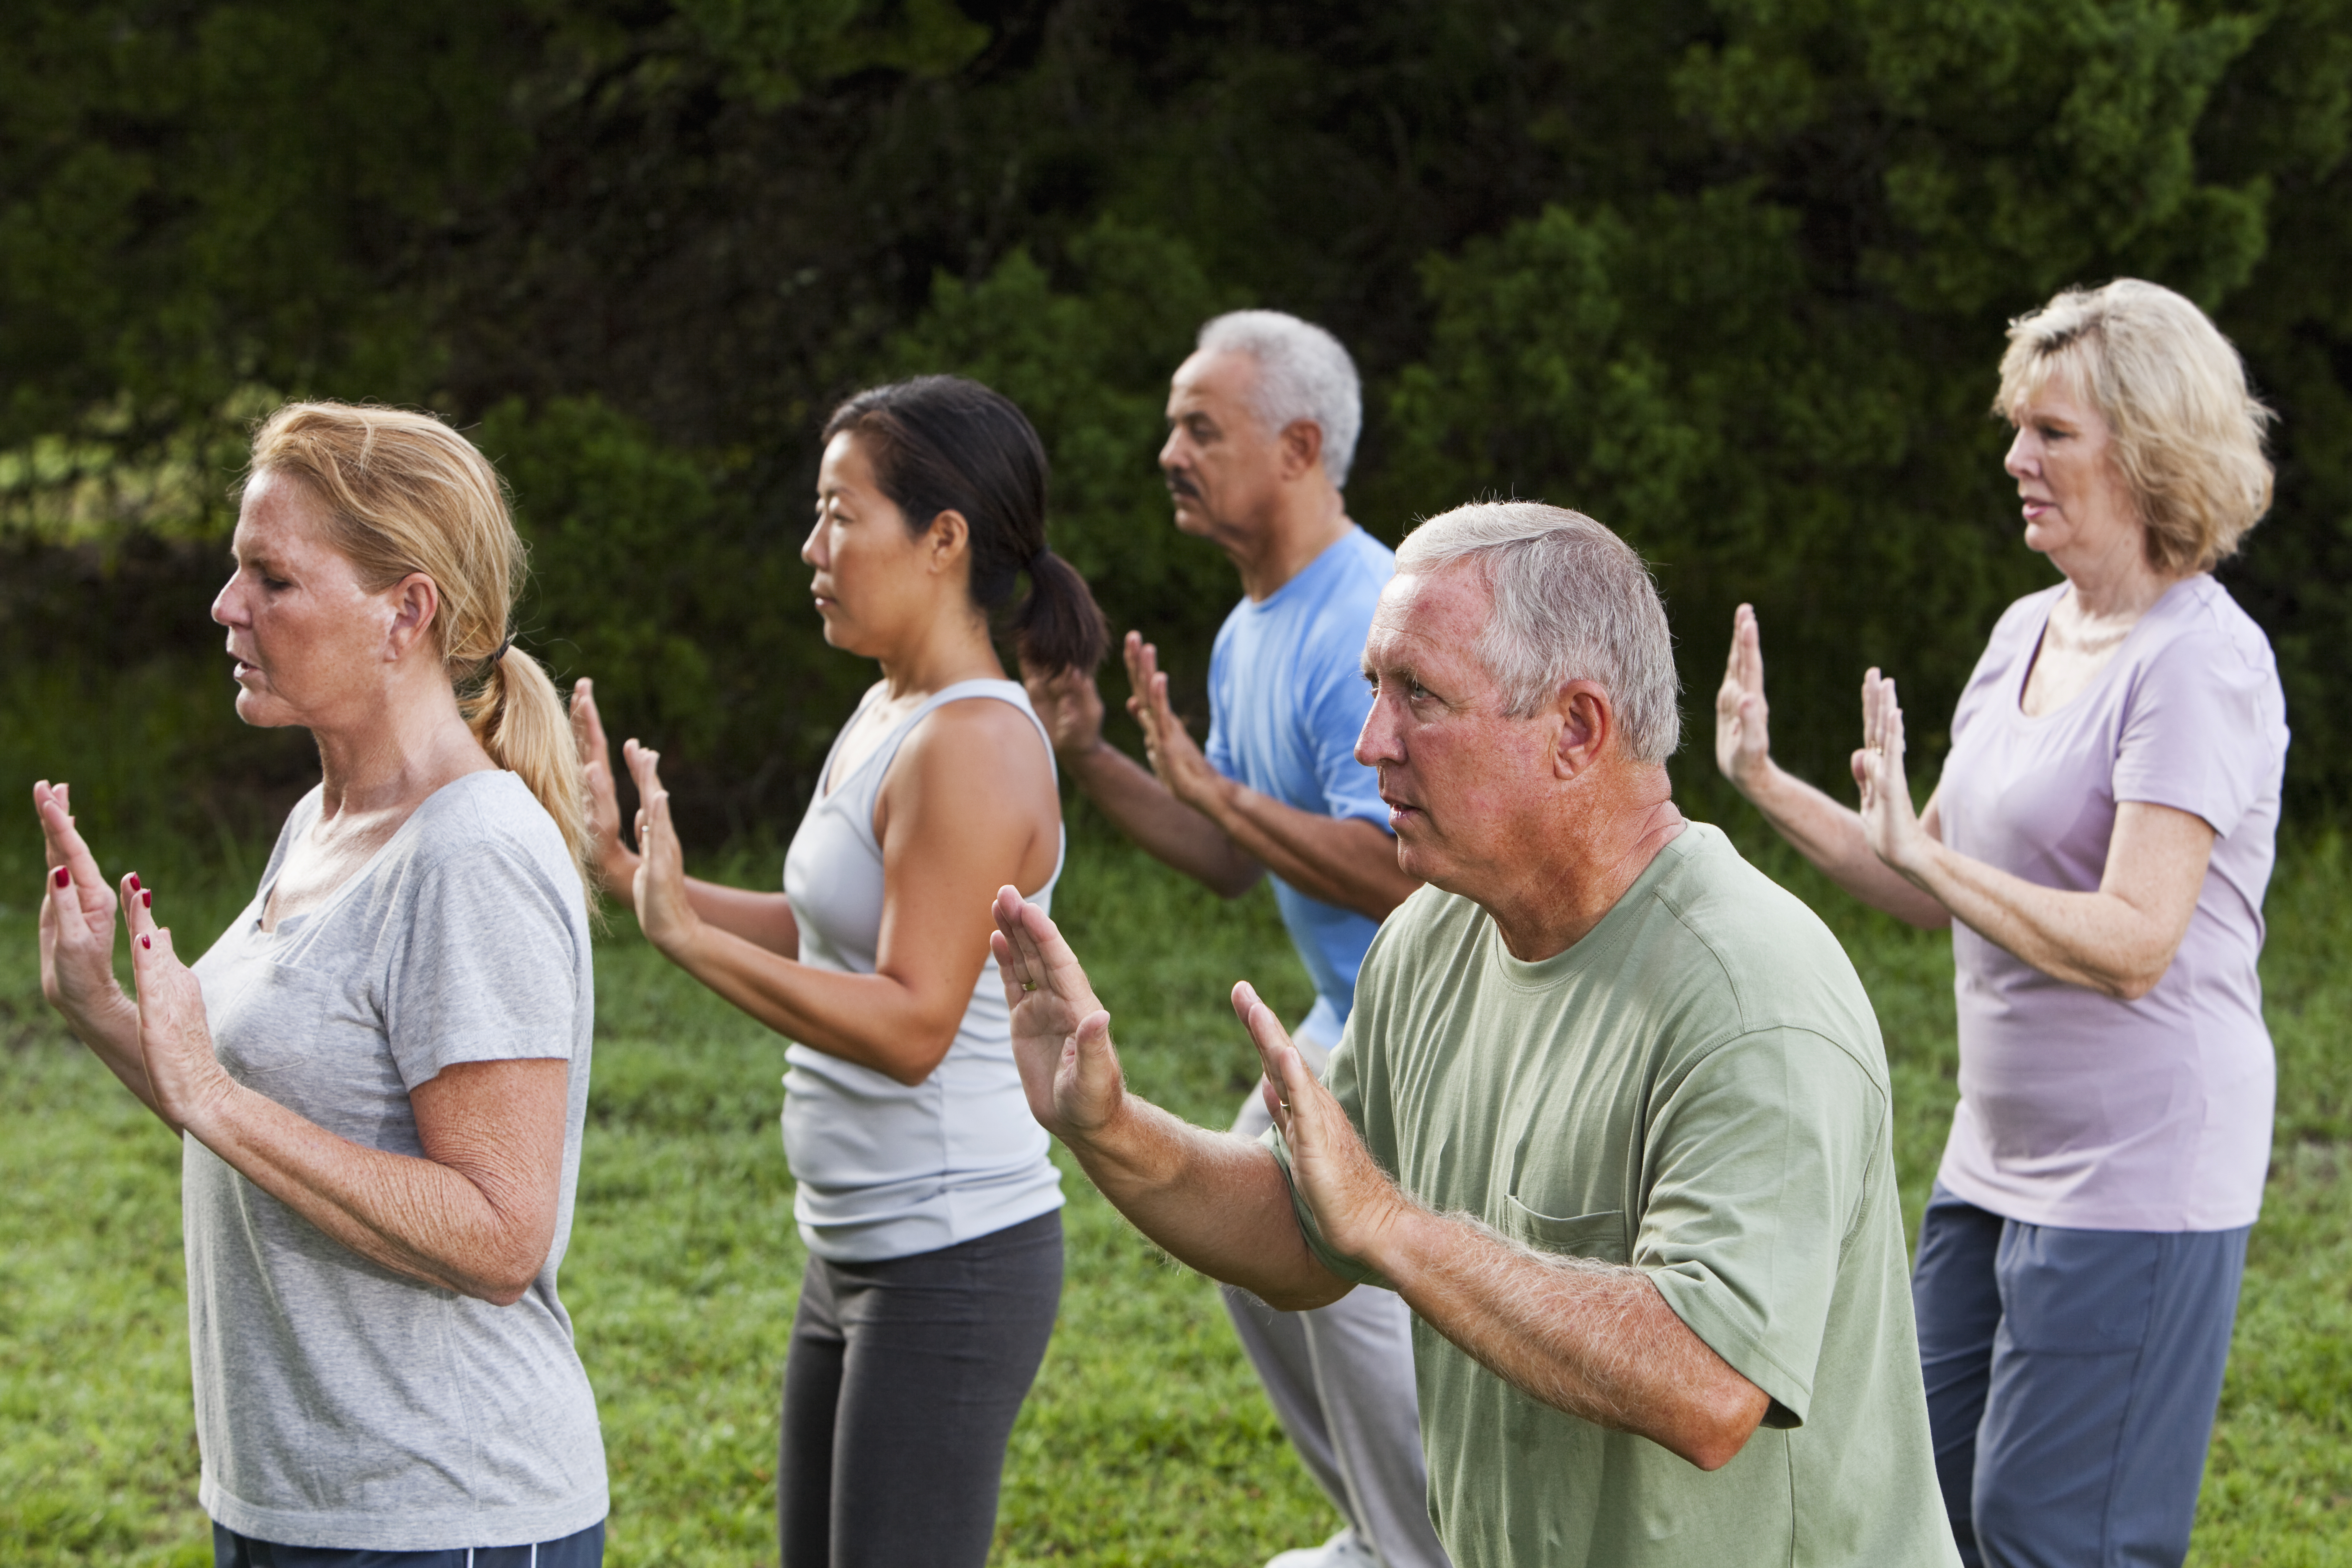 Tai chi may help prevent older adults from falling, a study finds - Scope